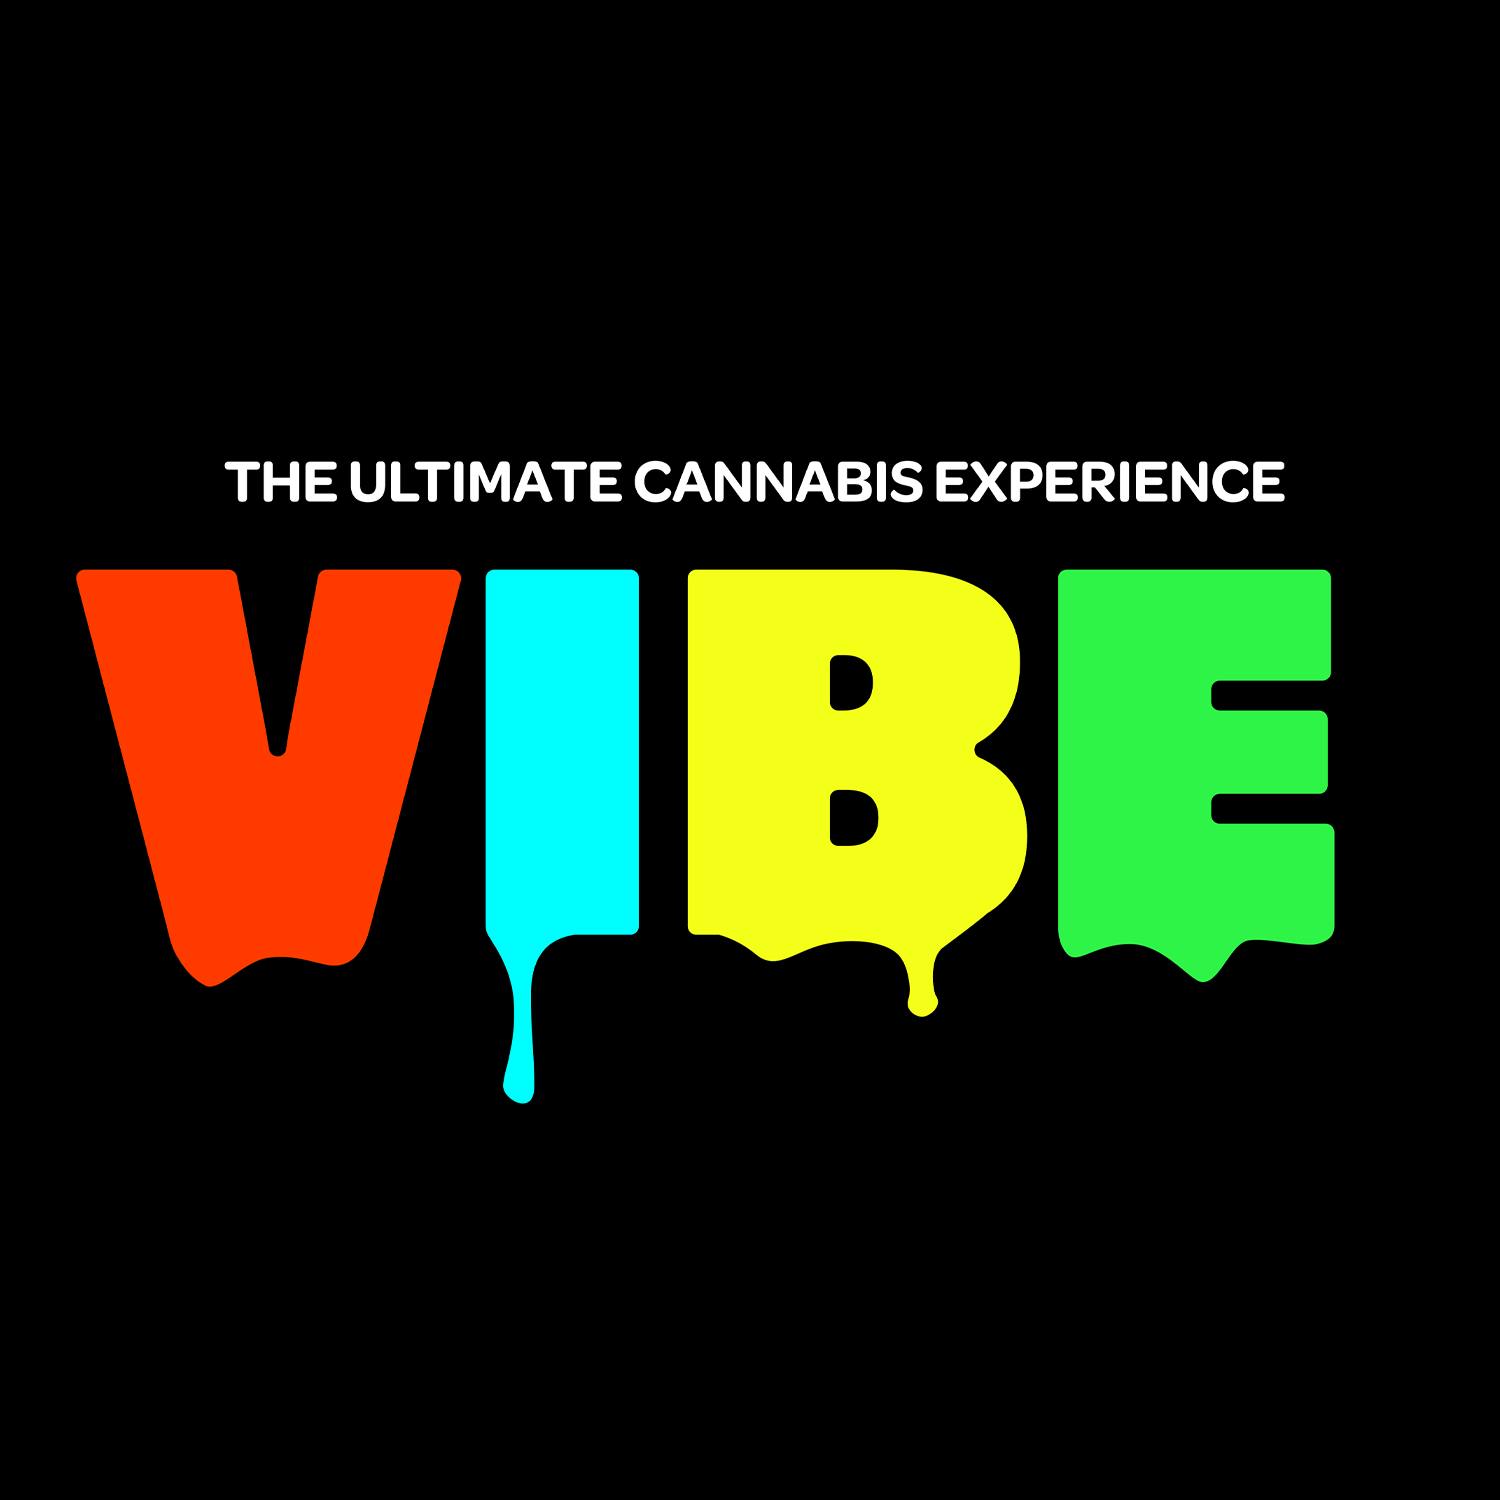 Vibe - The Ultimate Cannabis Experience logo